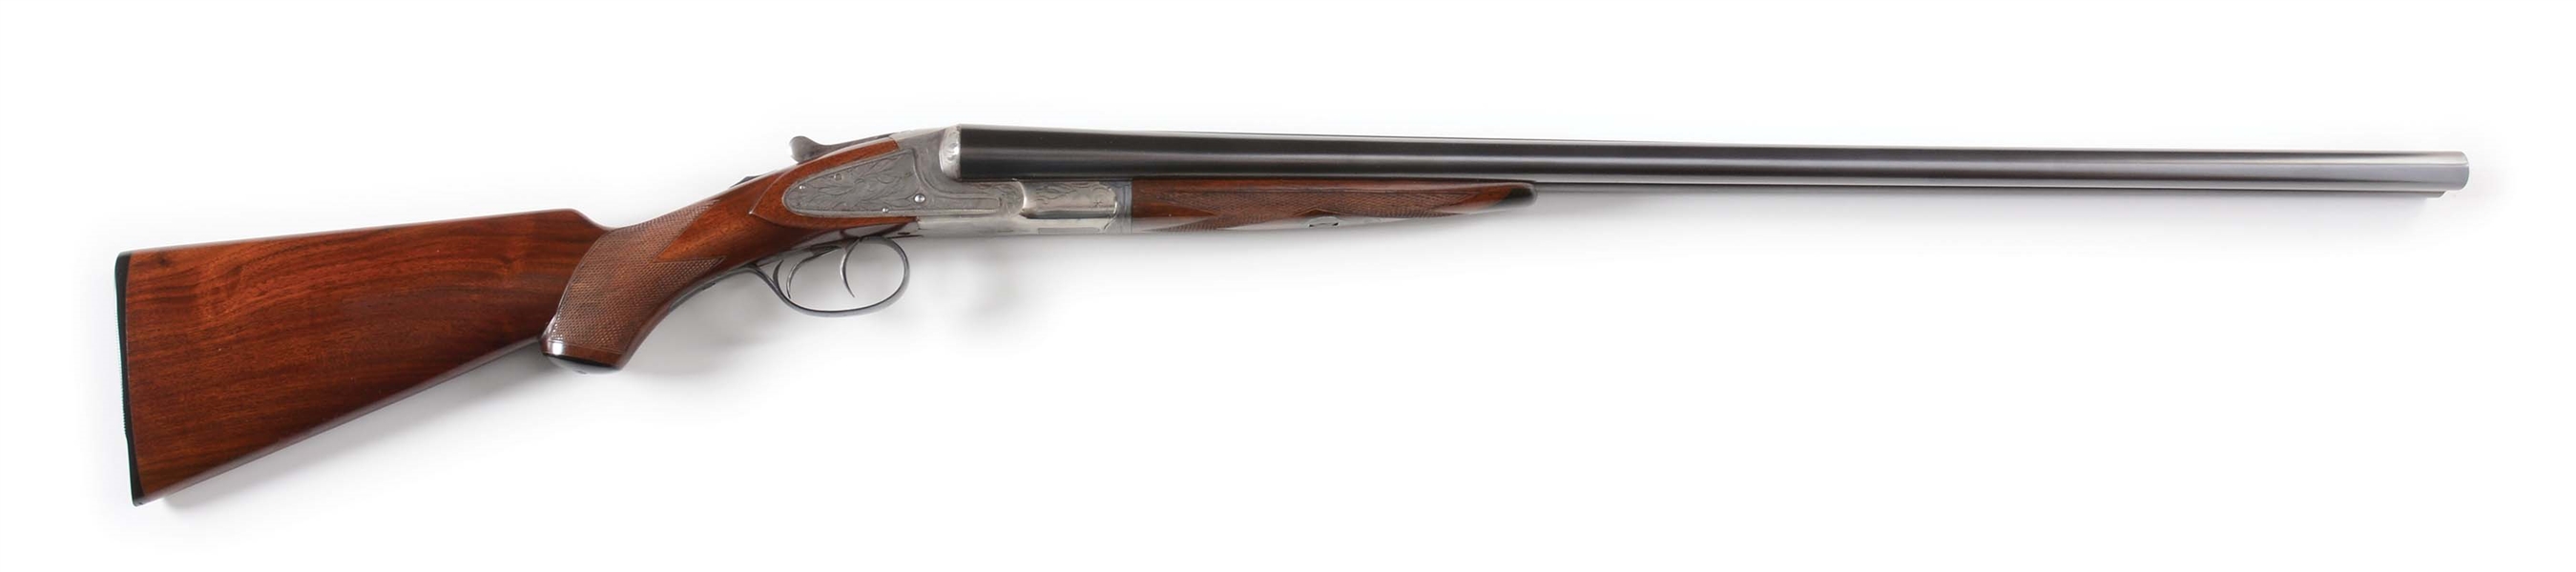 (M) L.C. SMITH IDEAL SIDE BY SIDE 12 BORE SHOTGUN.